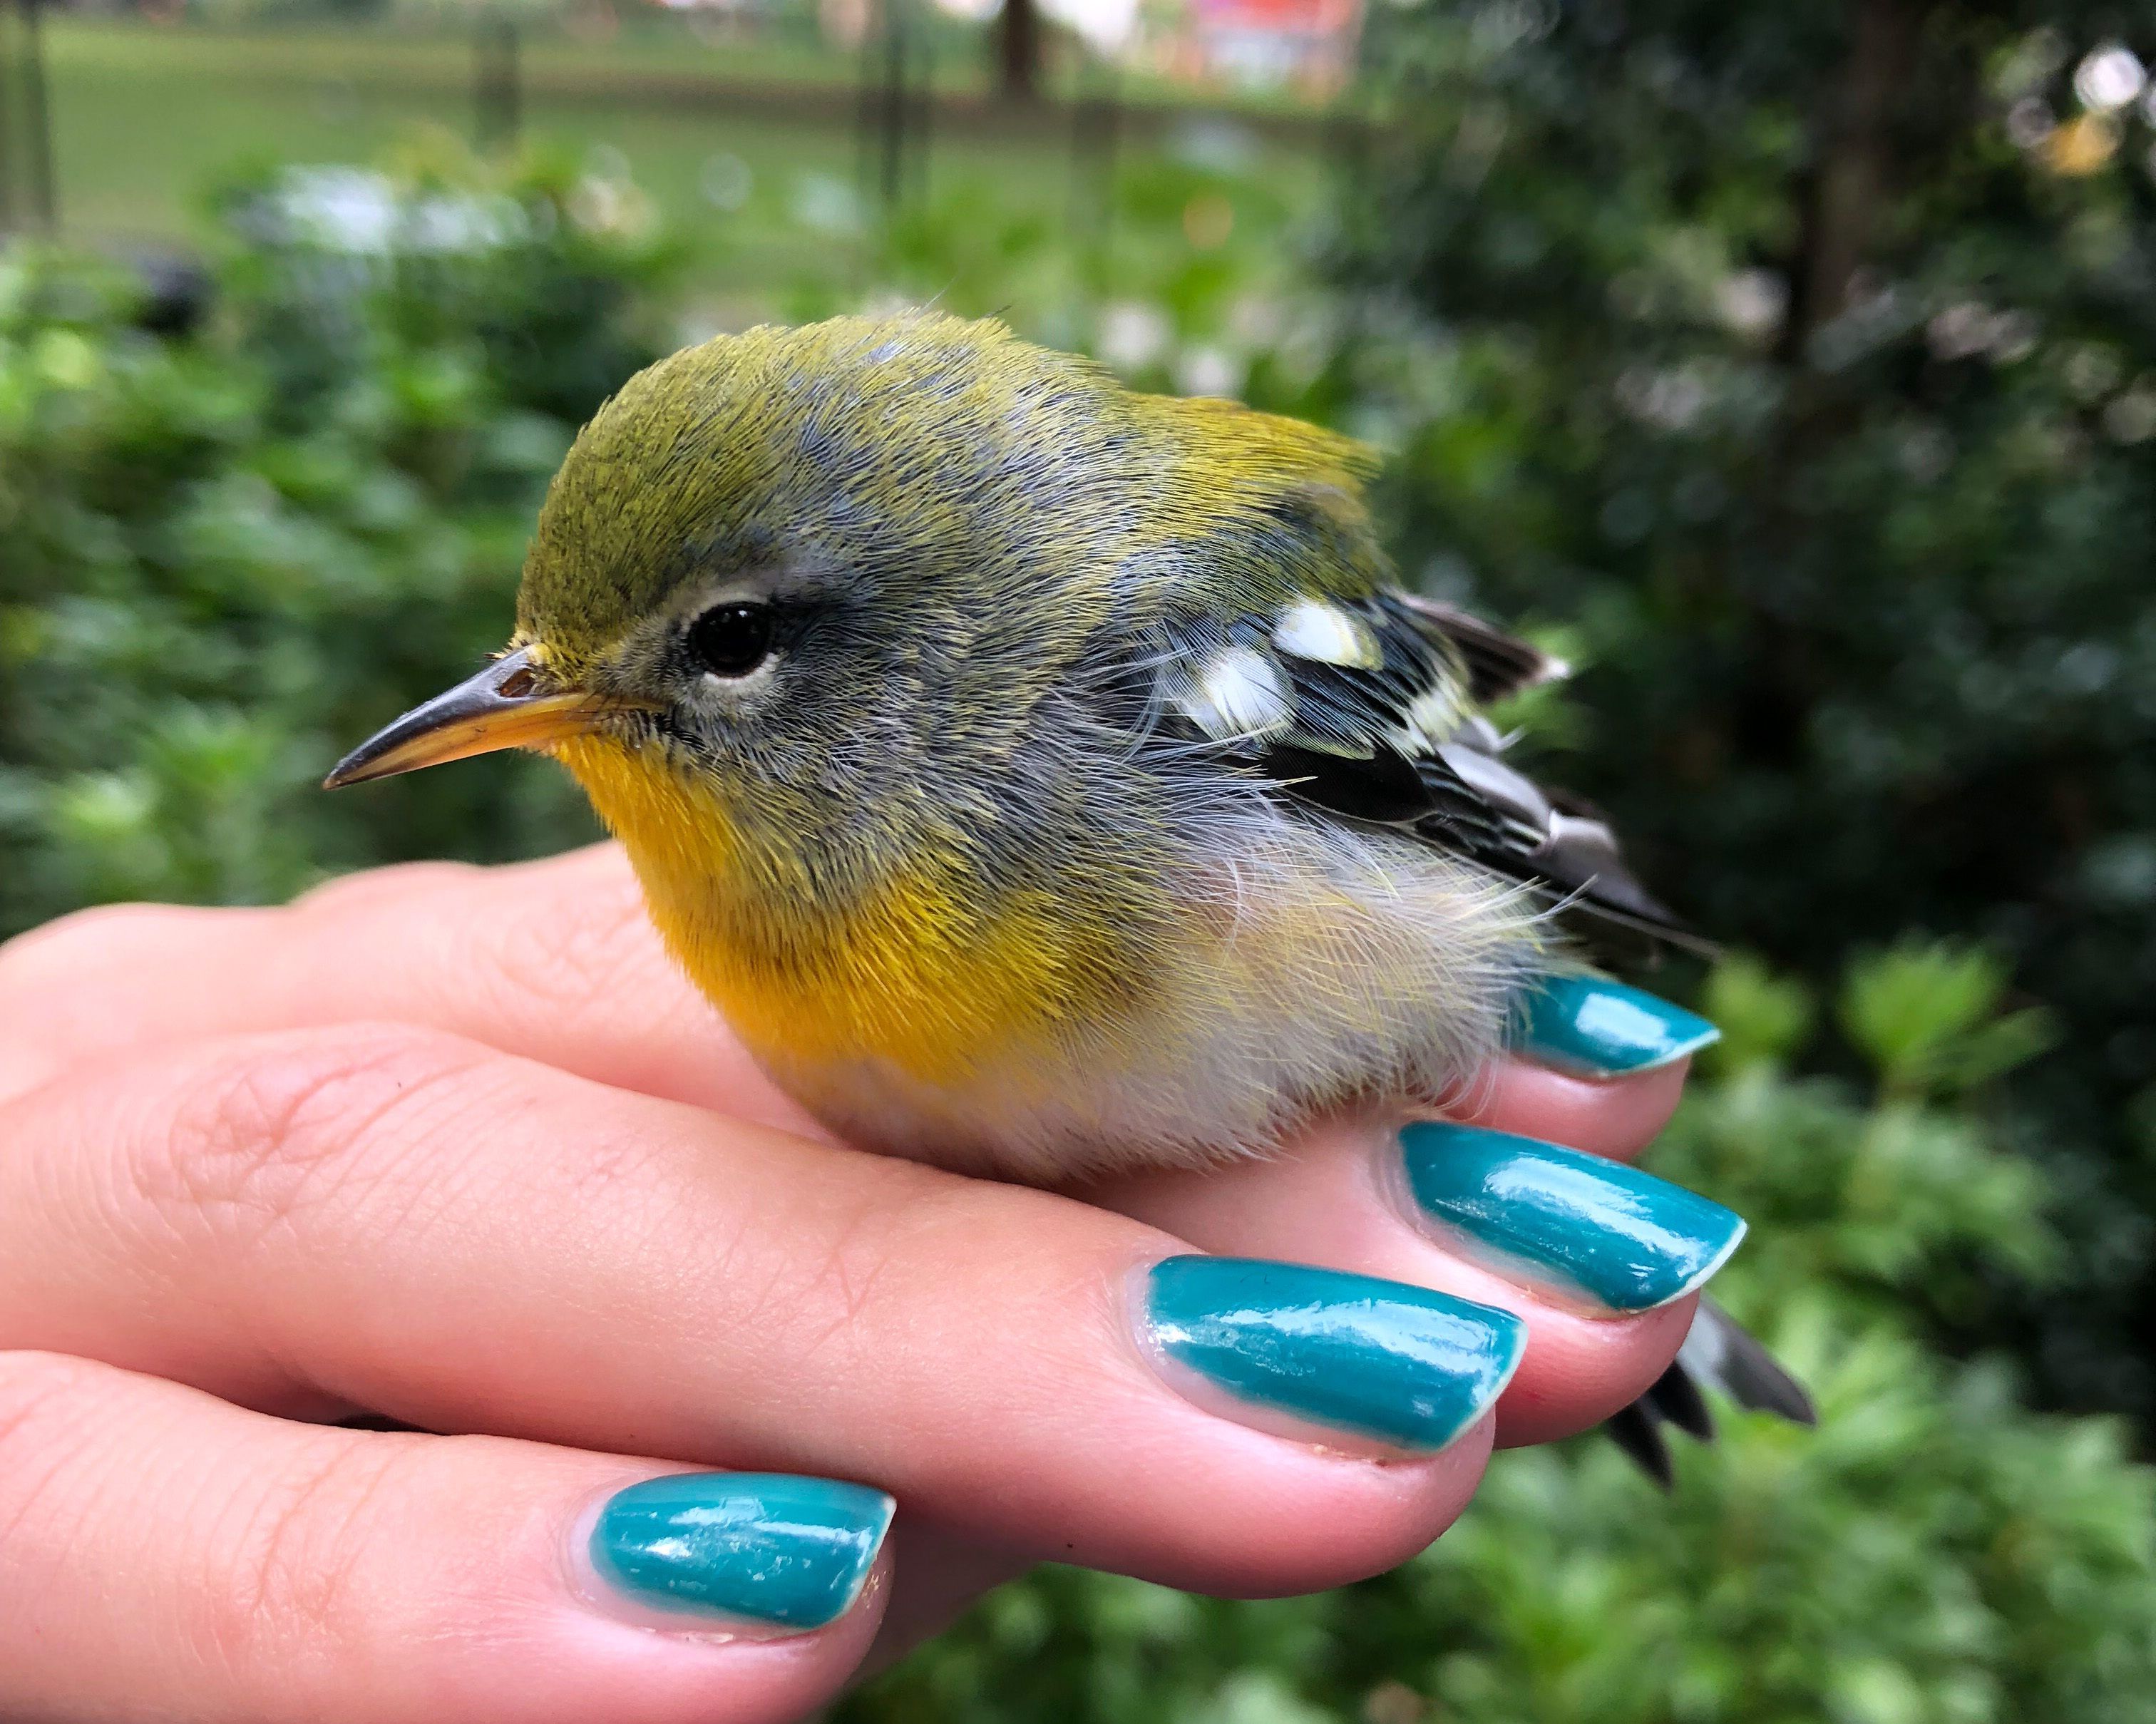 ￼This Northern Parula was found stunned in Manhattan’s Flatiron District. Conservation Biologist Kaitlyn Parkins helped it safely recover at the office before releasing it back into the wild in Madison Square Park, pictured here. Photo: NYC Audubon